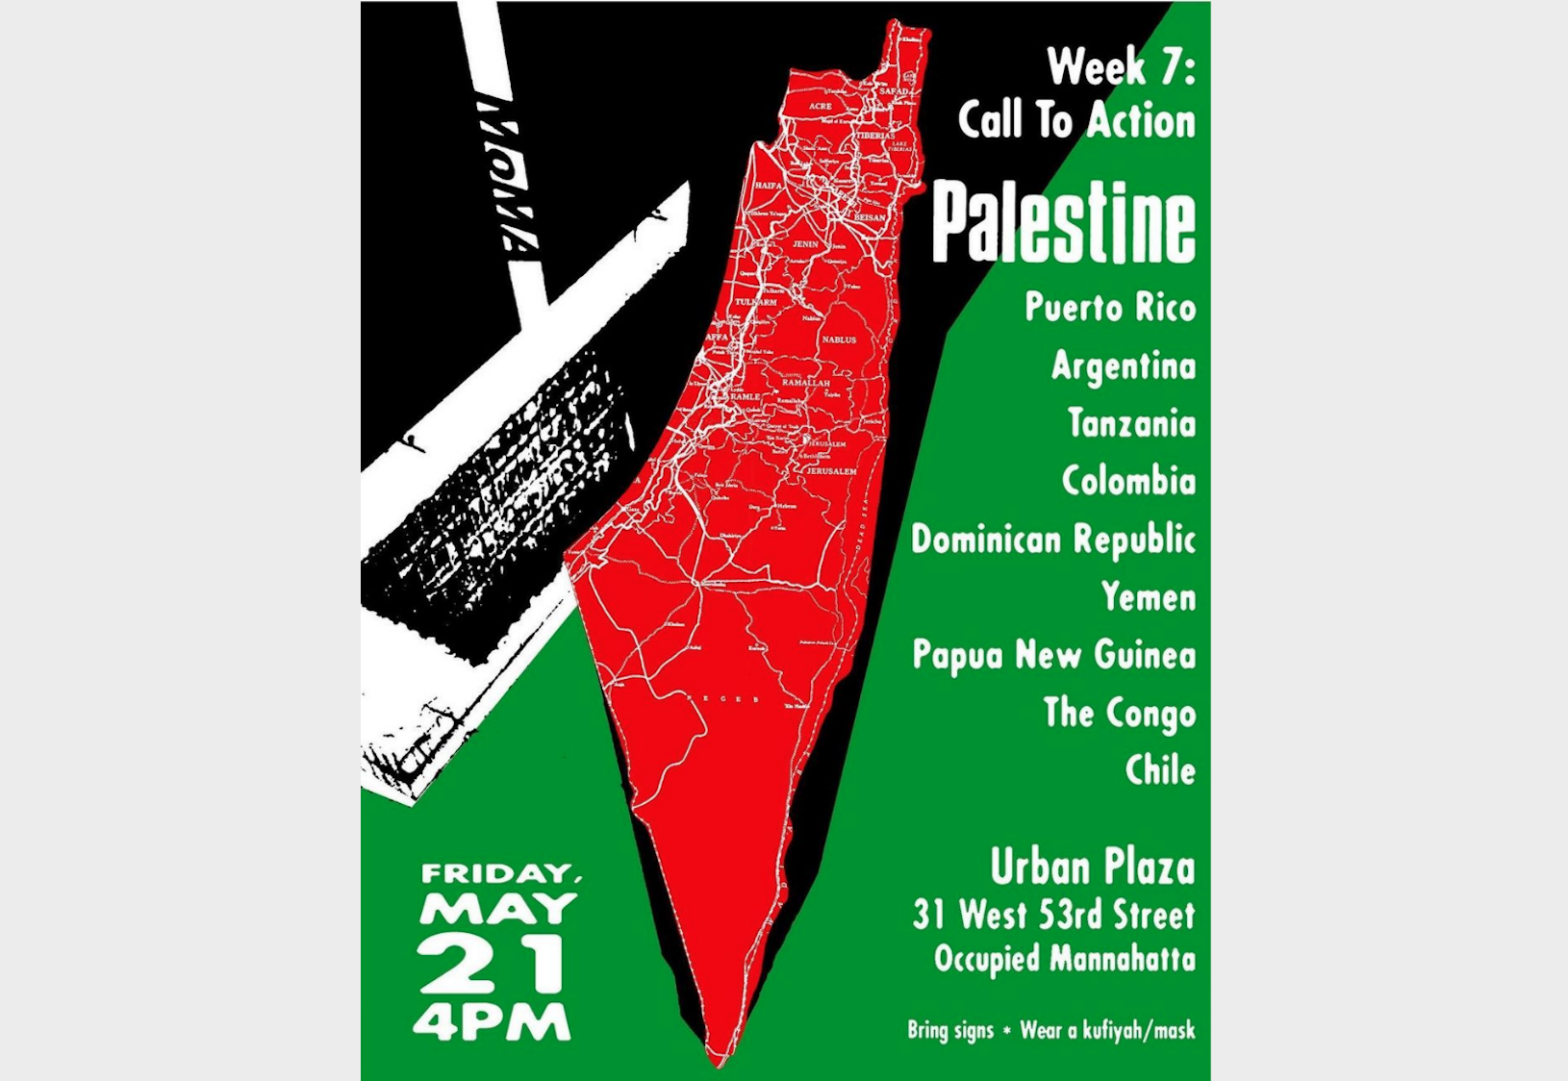 Free Palestine/Strike MoMA: A Call to Action